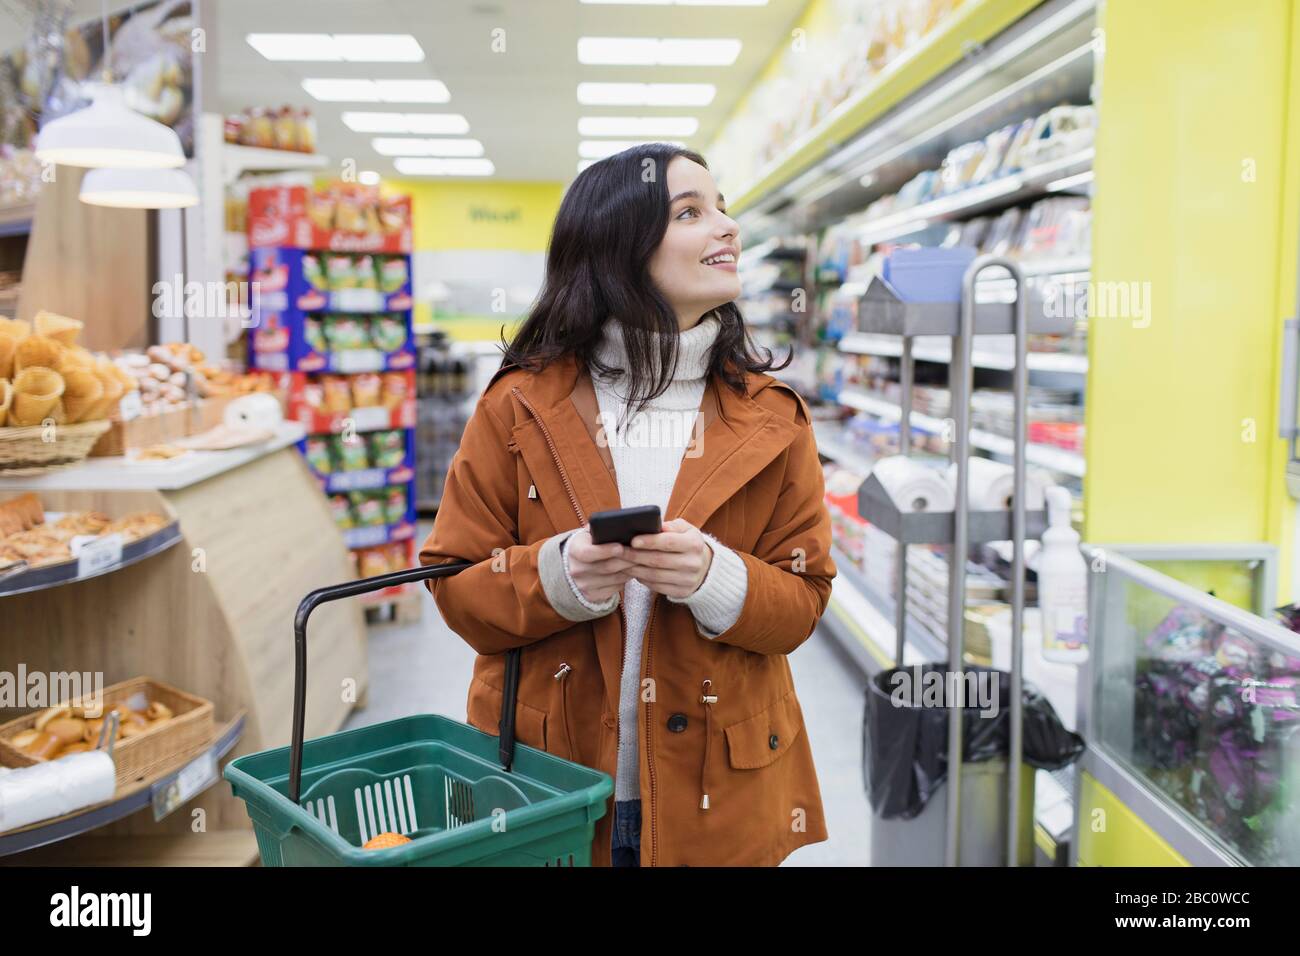 Woman with smart phone shopping in supermarket Stock Photo